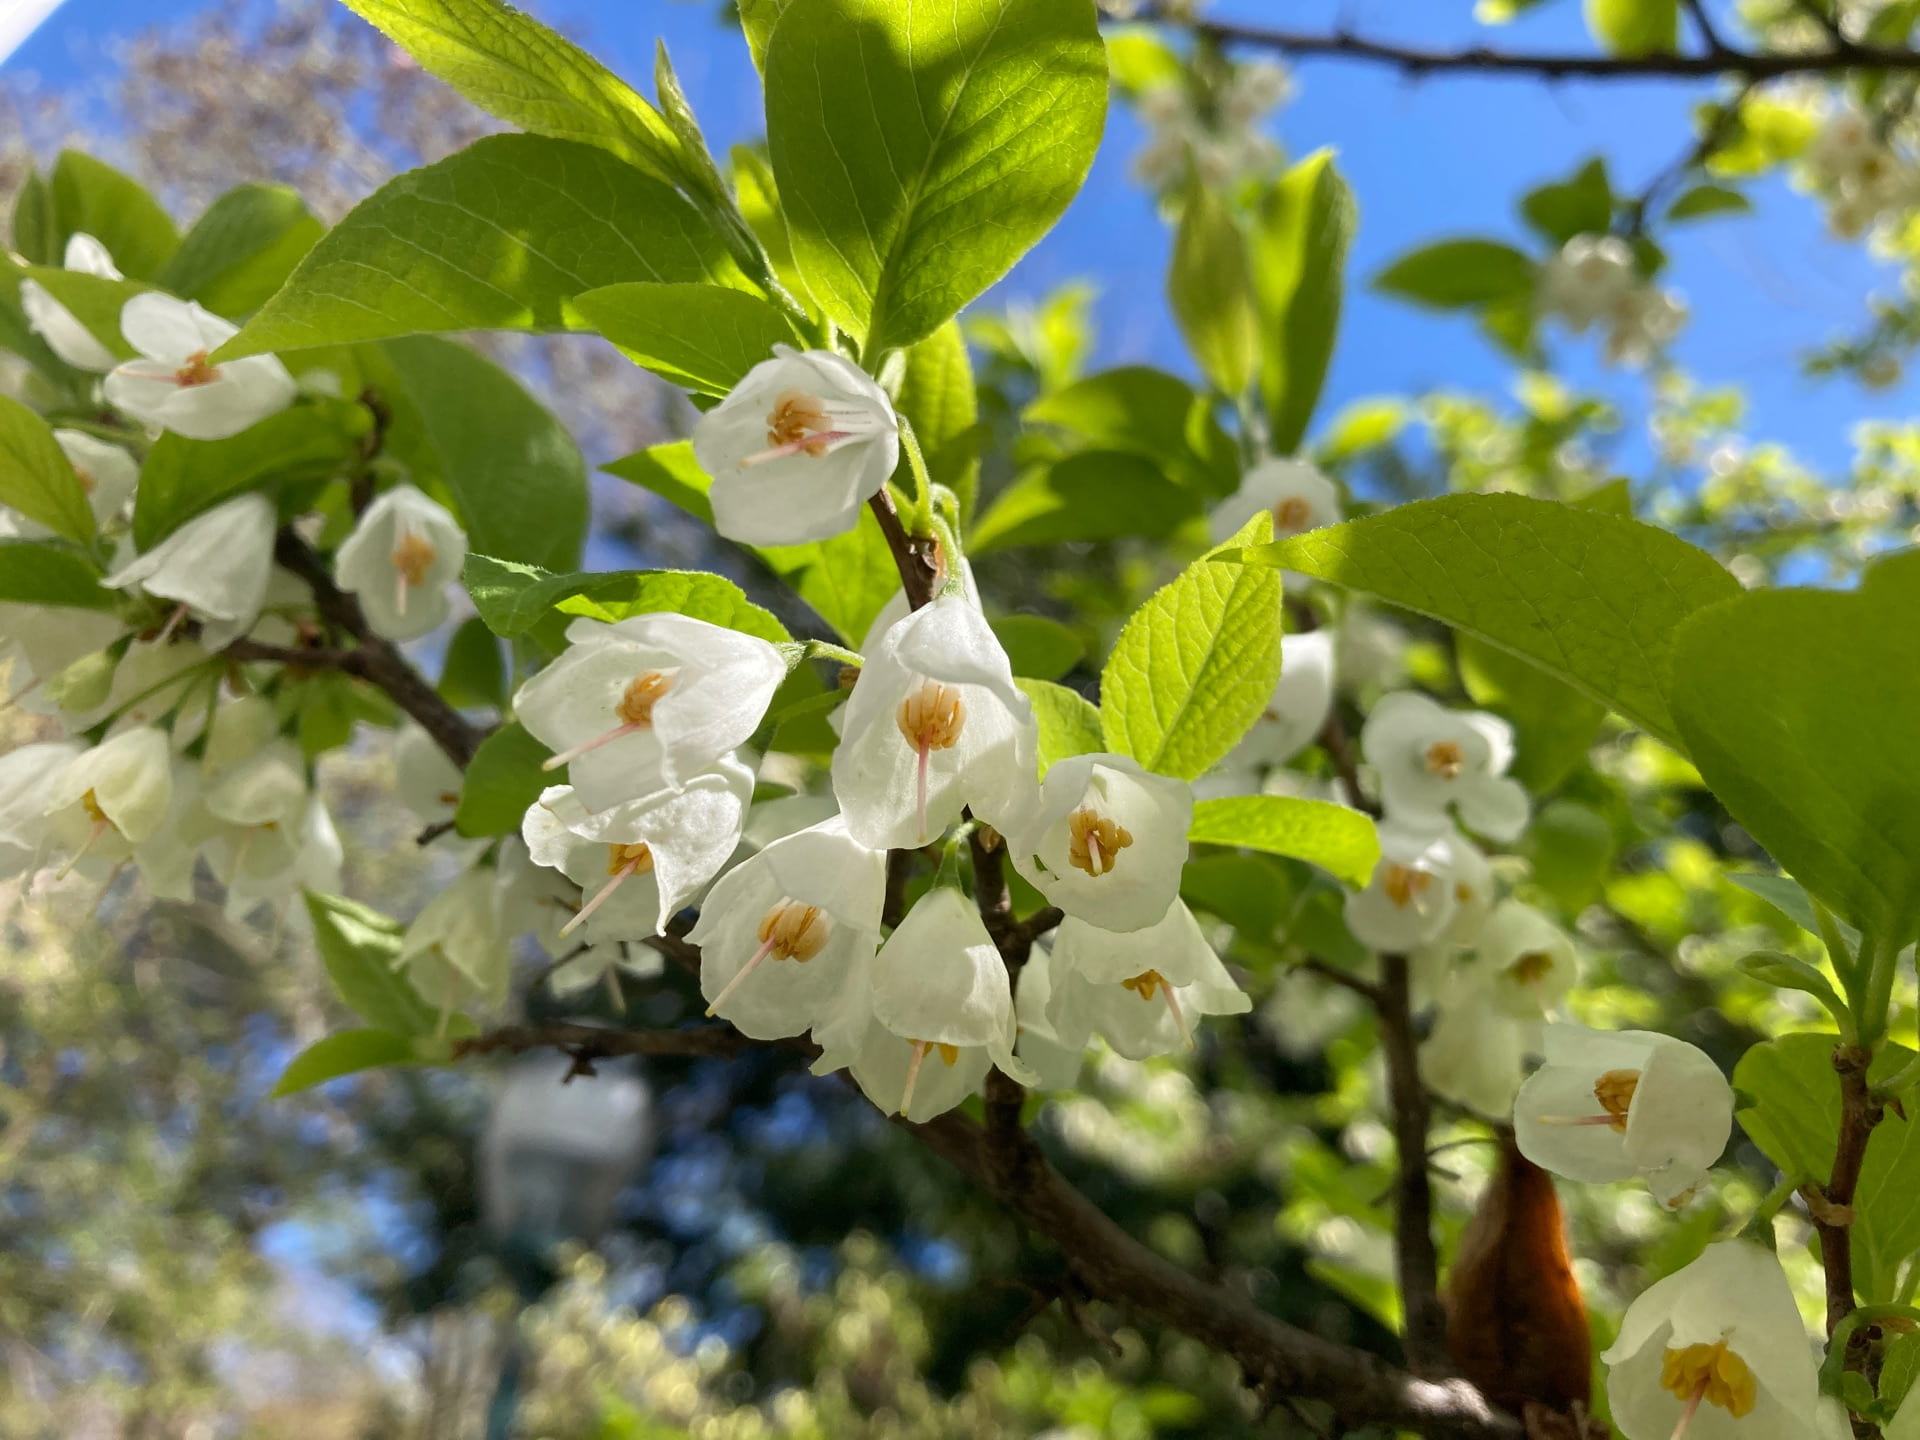 The Carolina silverbell, Halesia carolina, blooms with pendulous white flowers in April, which are irresistible to bees.